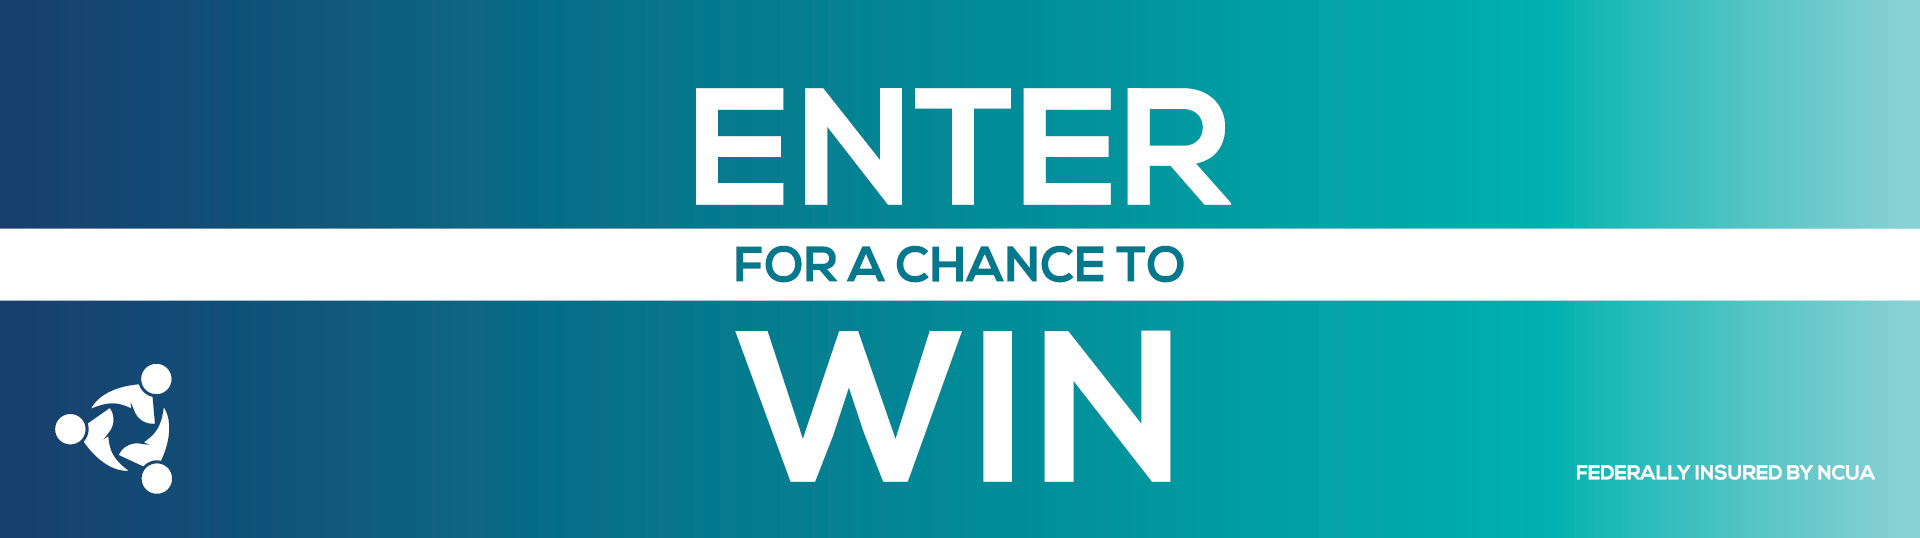 Enter for a chance to win - Michigan United Credit Union